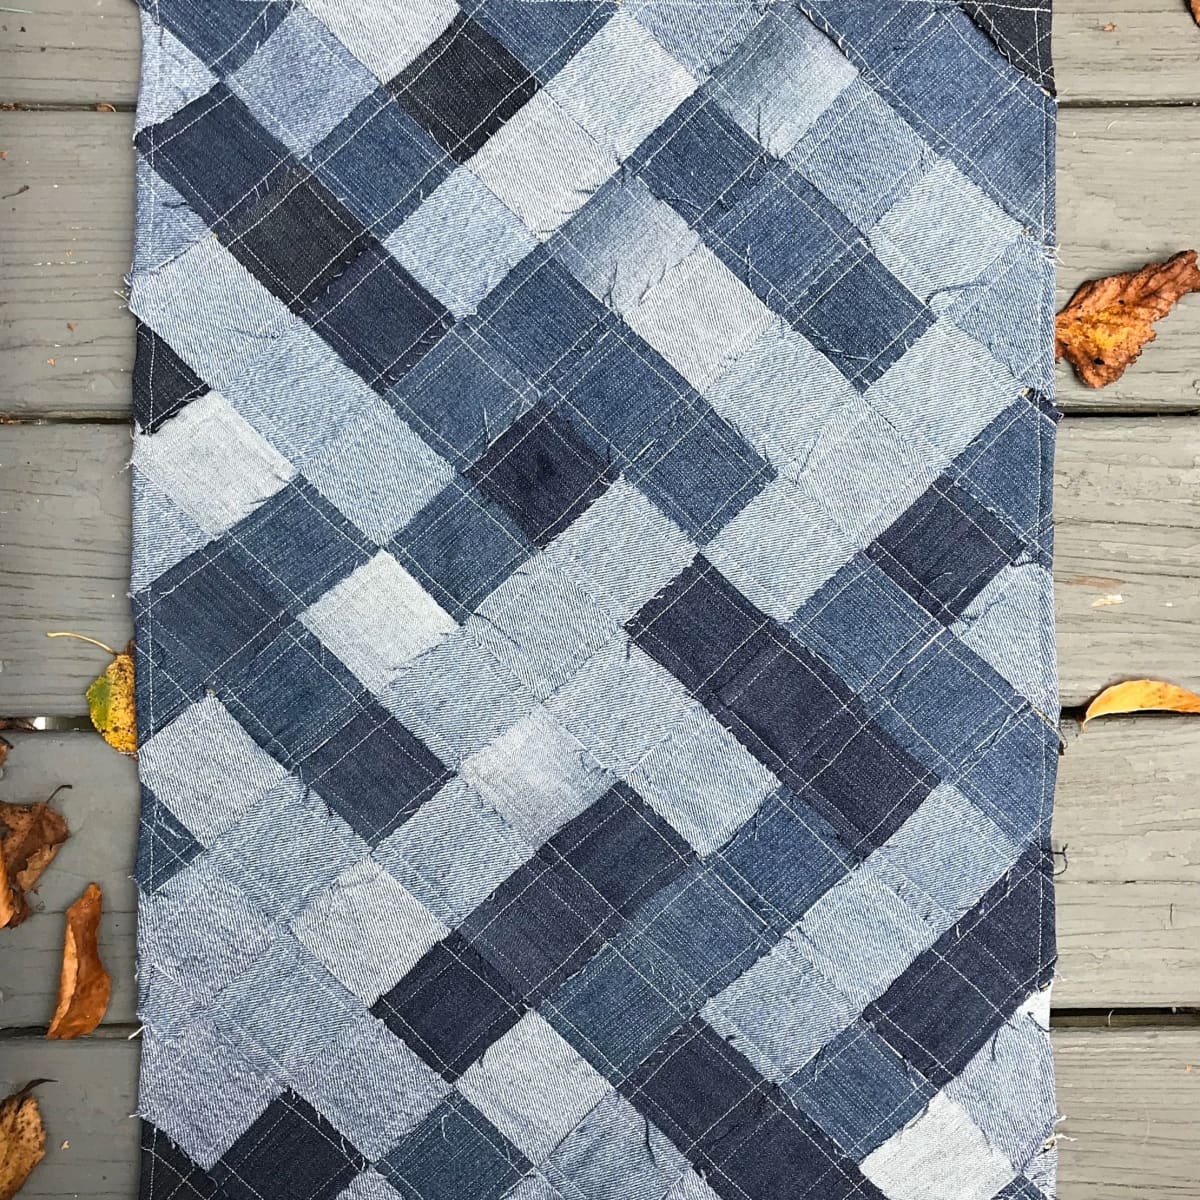 Sewing with scraps: How to make a patchwork carpet 